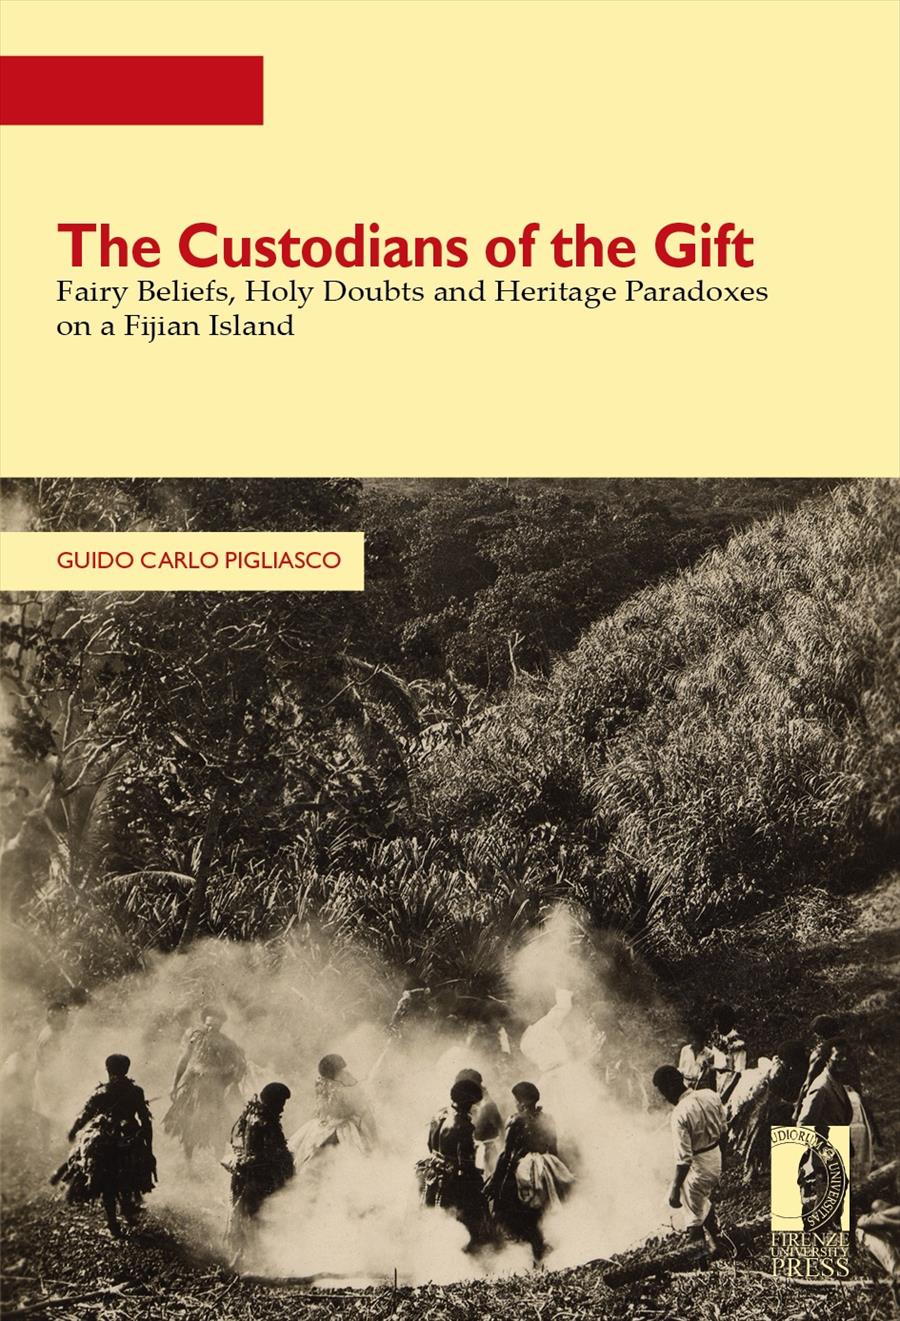 The Custodians of the Gift